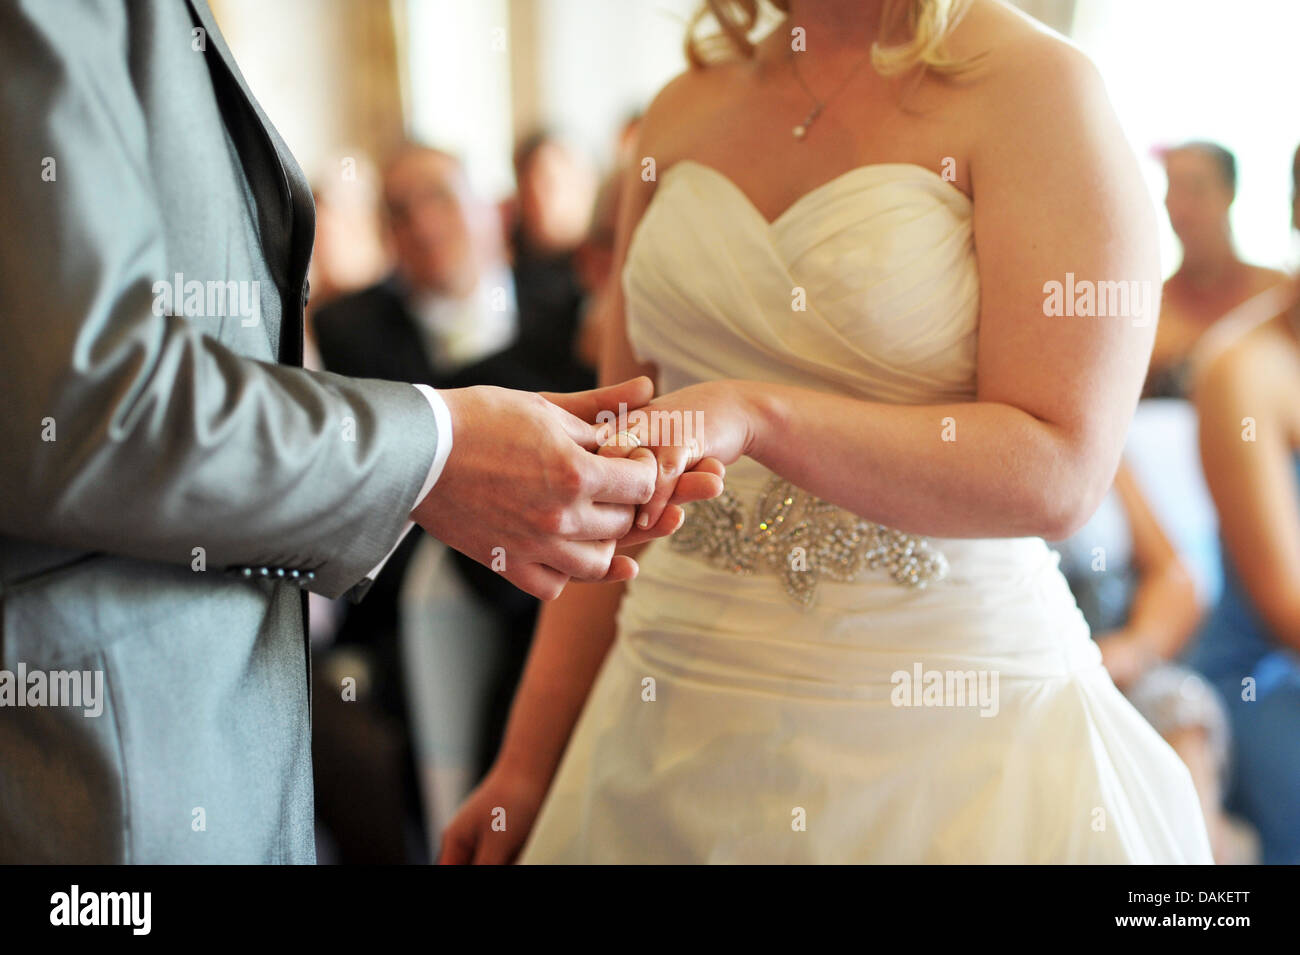 Bride and groom exchange wedding rings during the wedding ceremony. Stock Photo